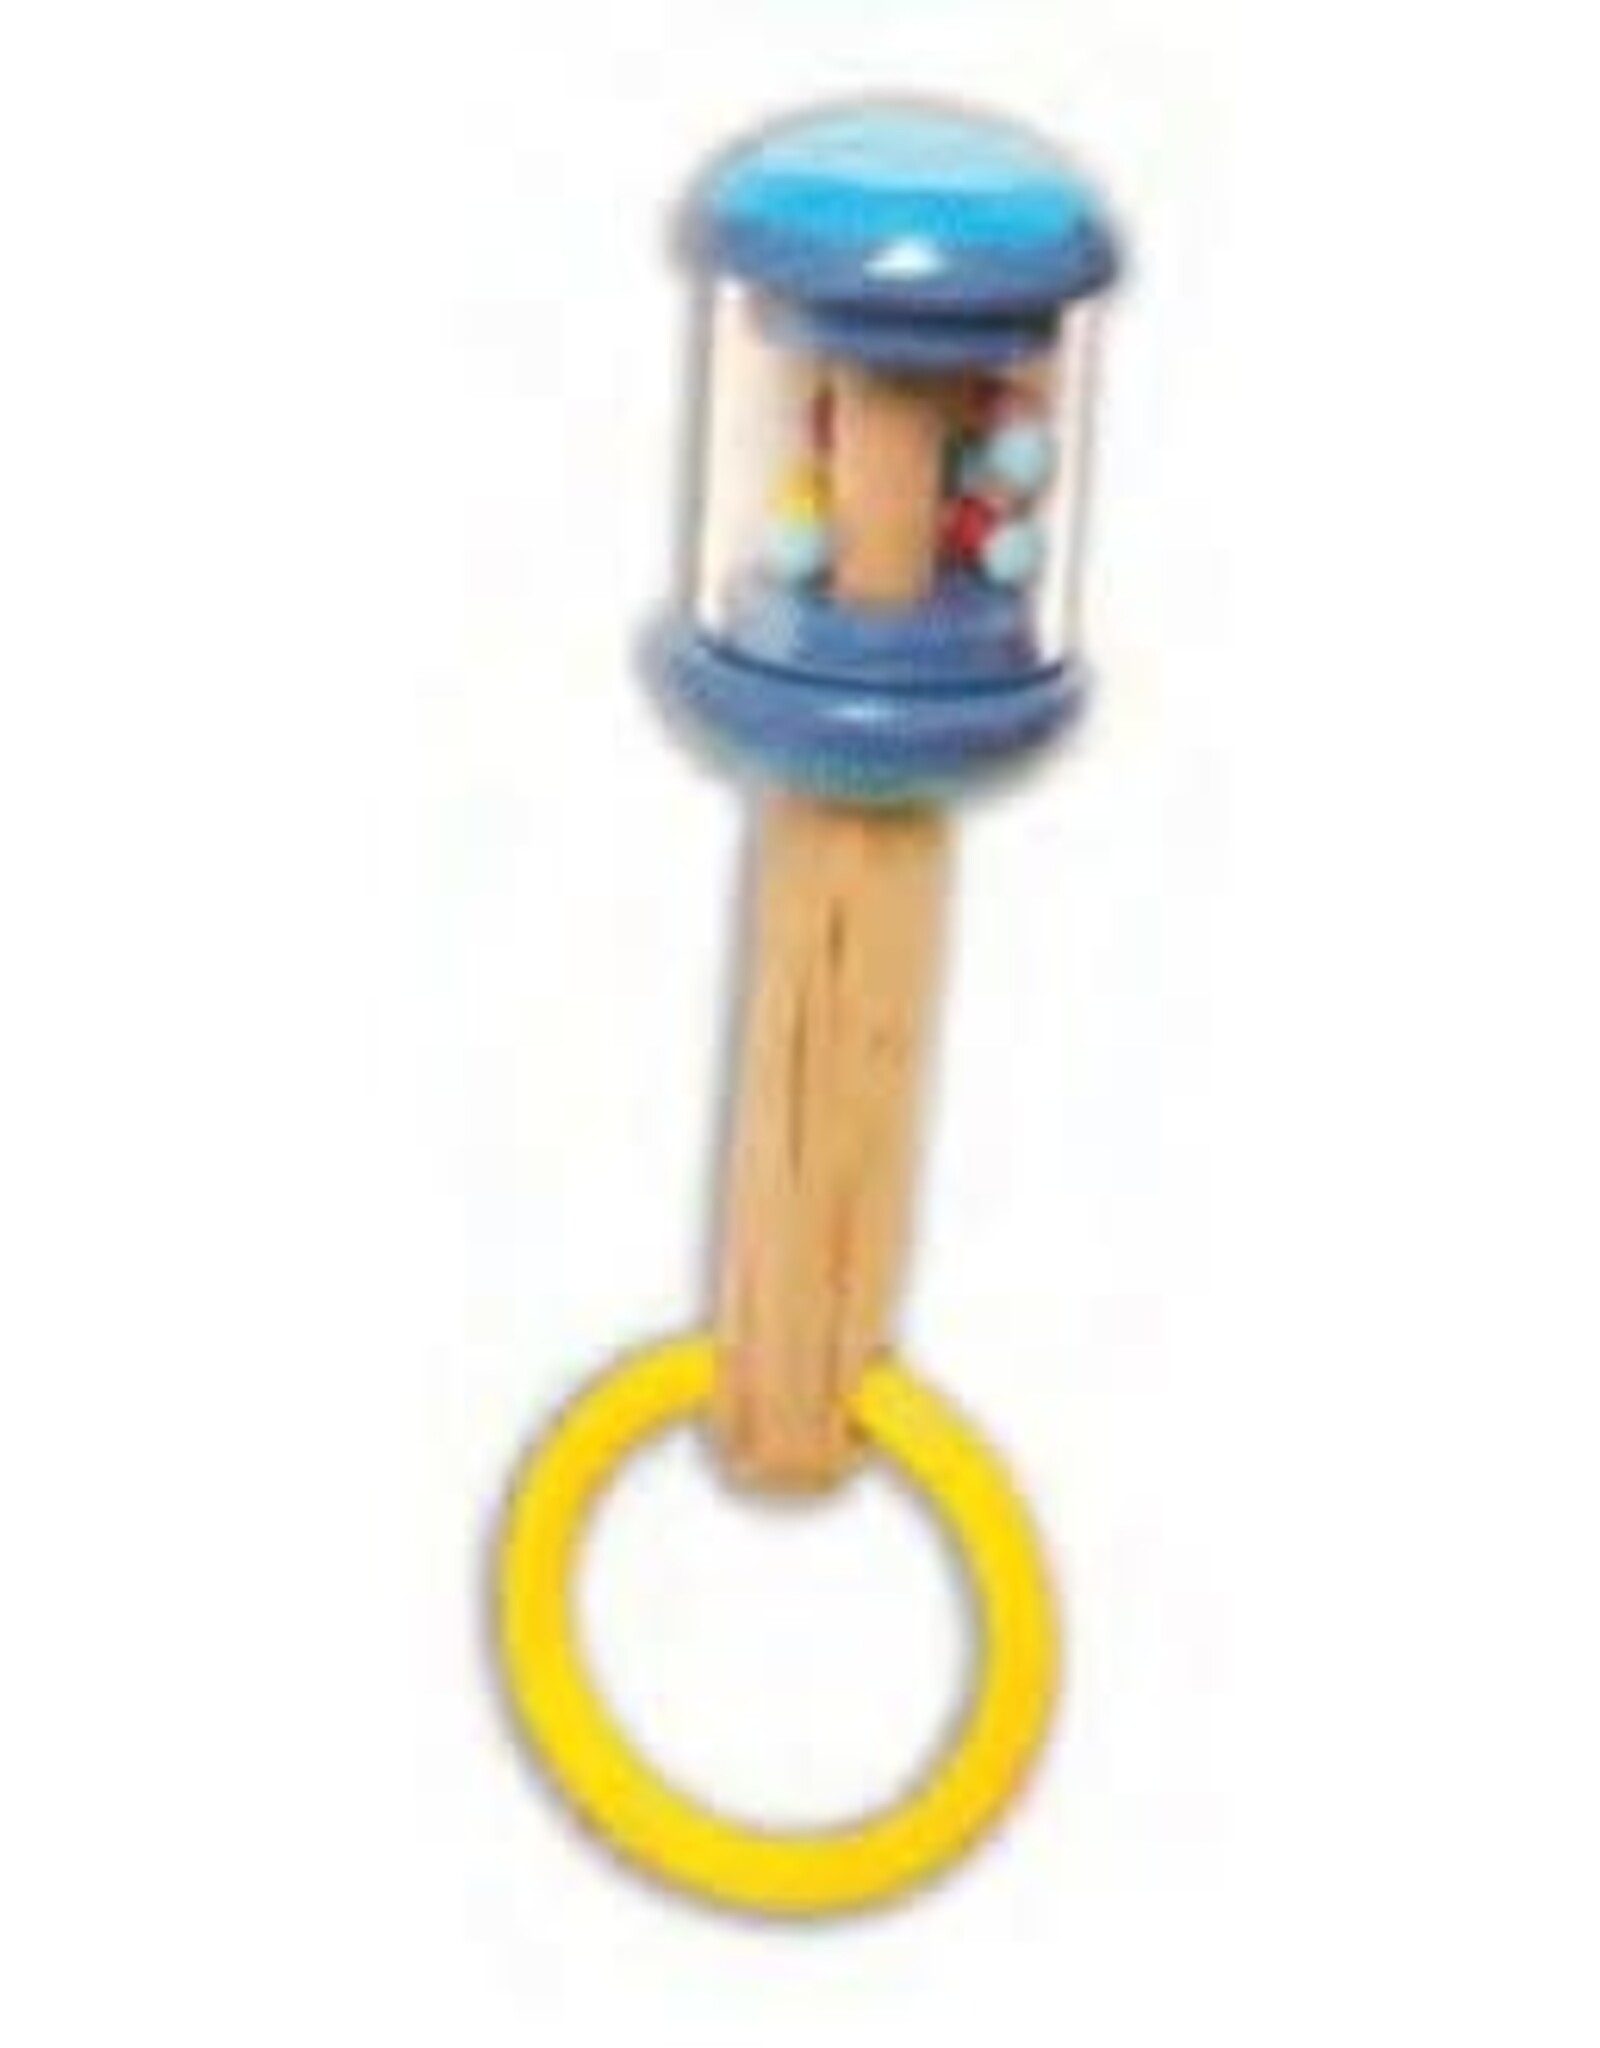 The Original Toy Co. Baby Rattle